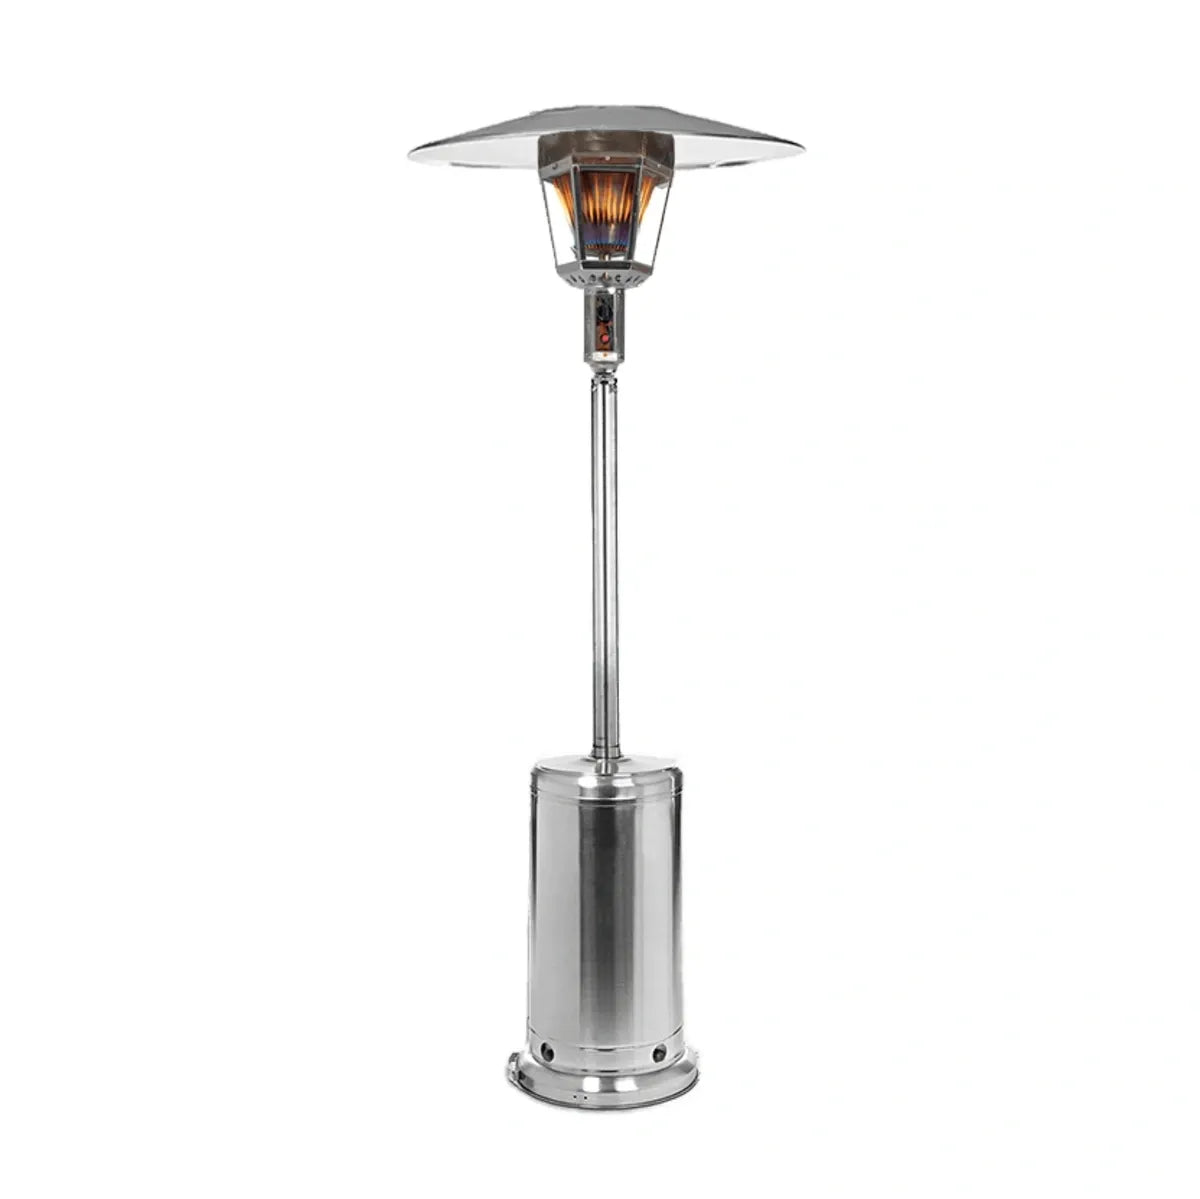 Radtec 96" Real Flame Natural Gas Patio Heater - Stainless Steel Finish (40,000 BTU) 96-NTR-GAS-SS